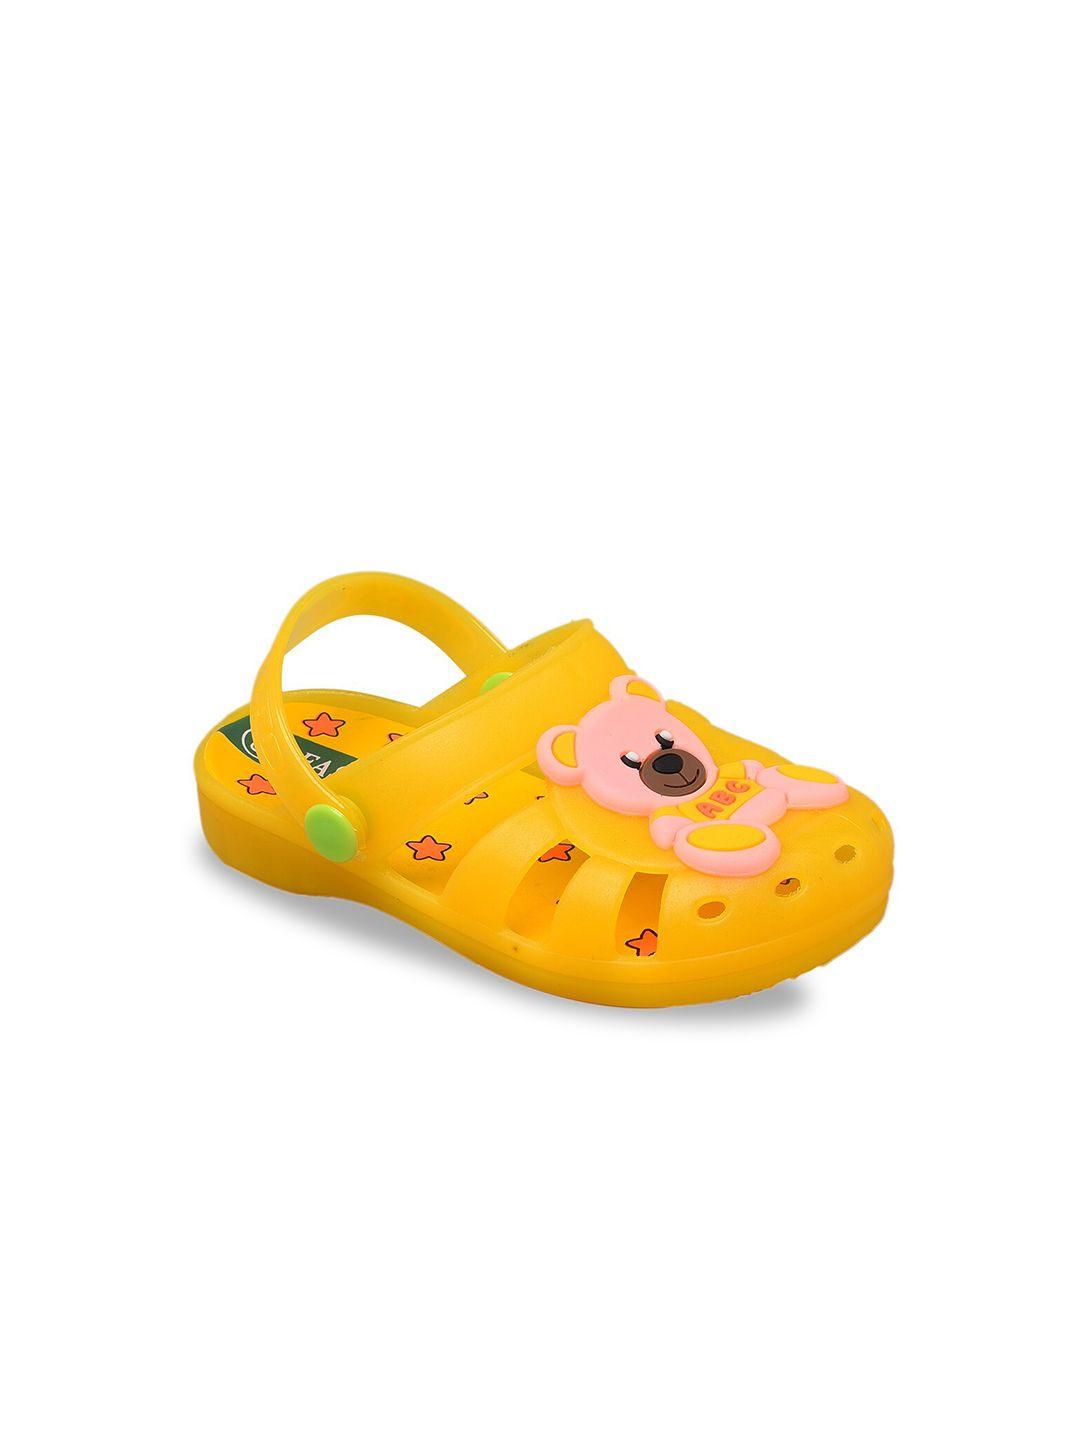 yellow bee unisex kids yellow & pink clogs sandals